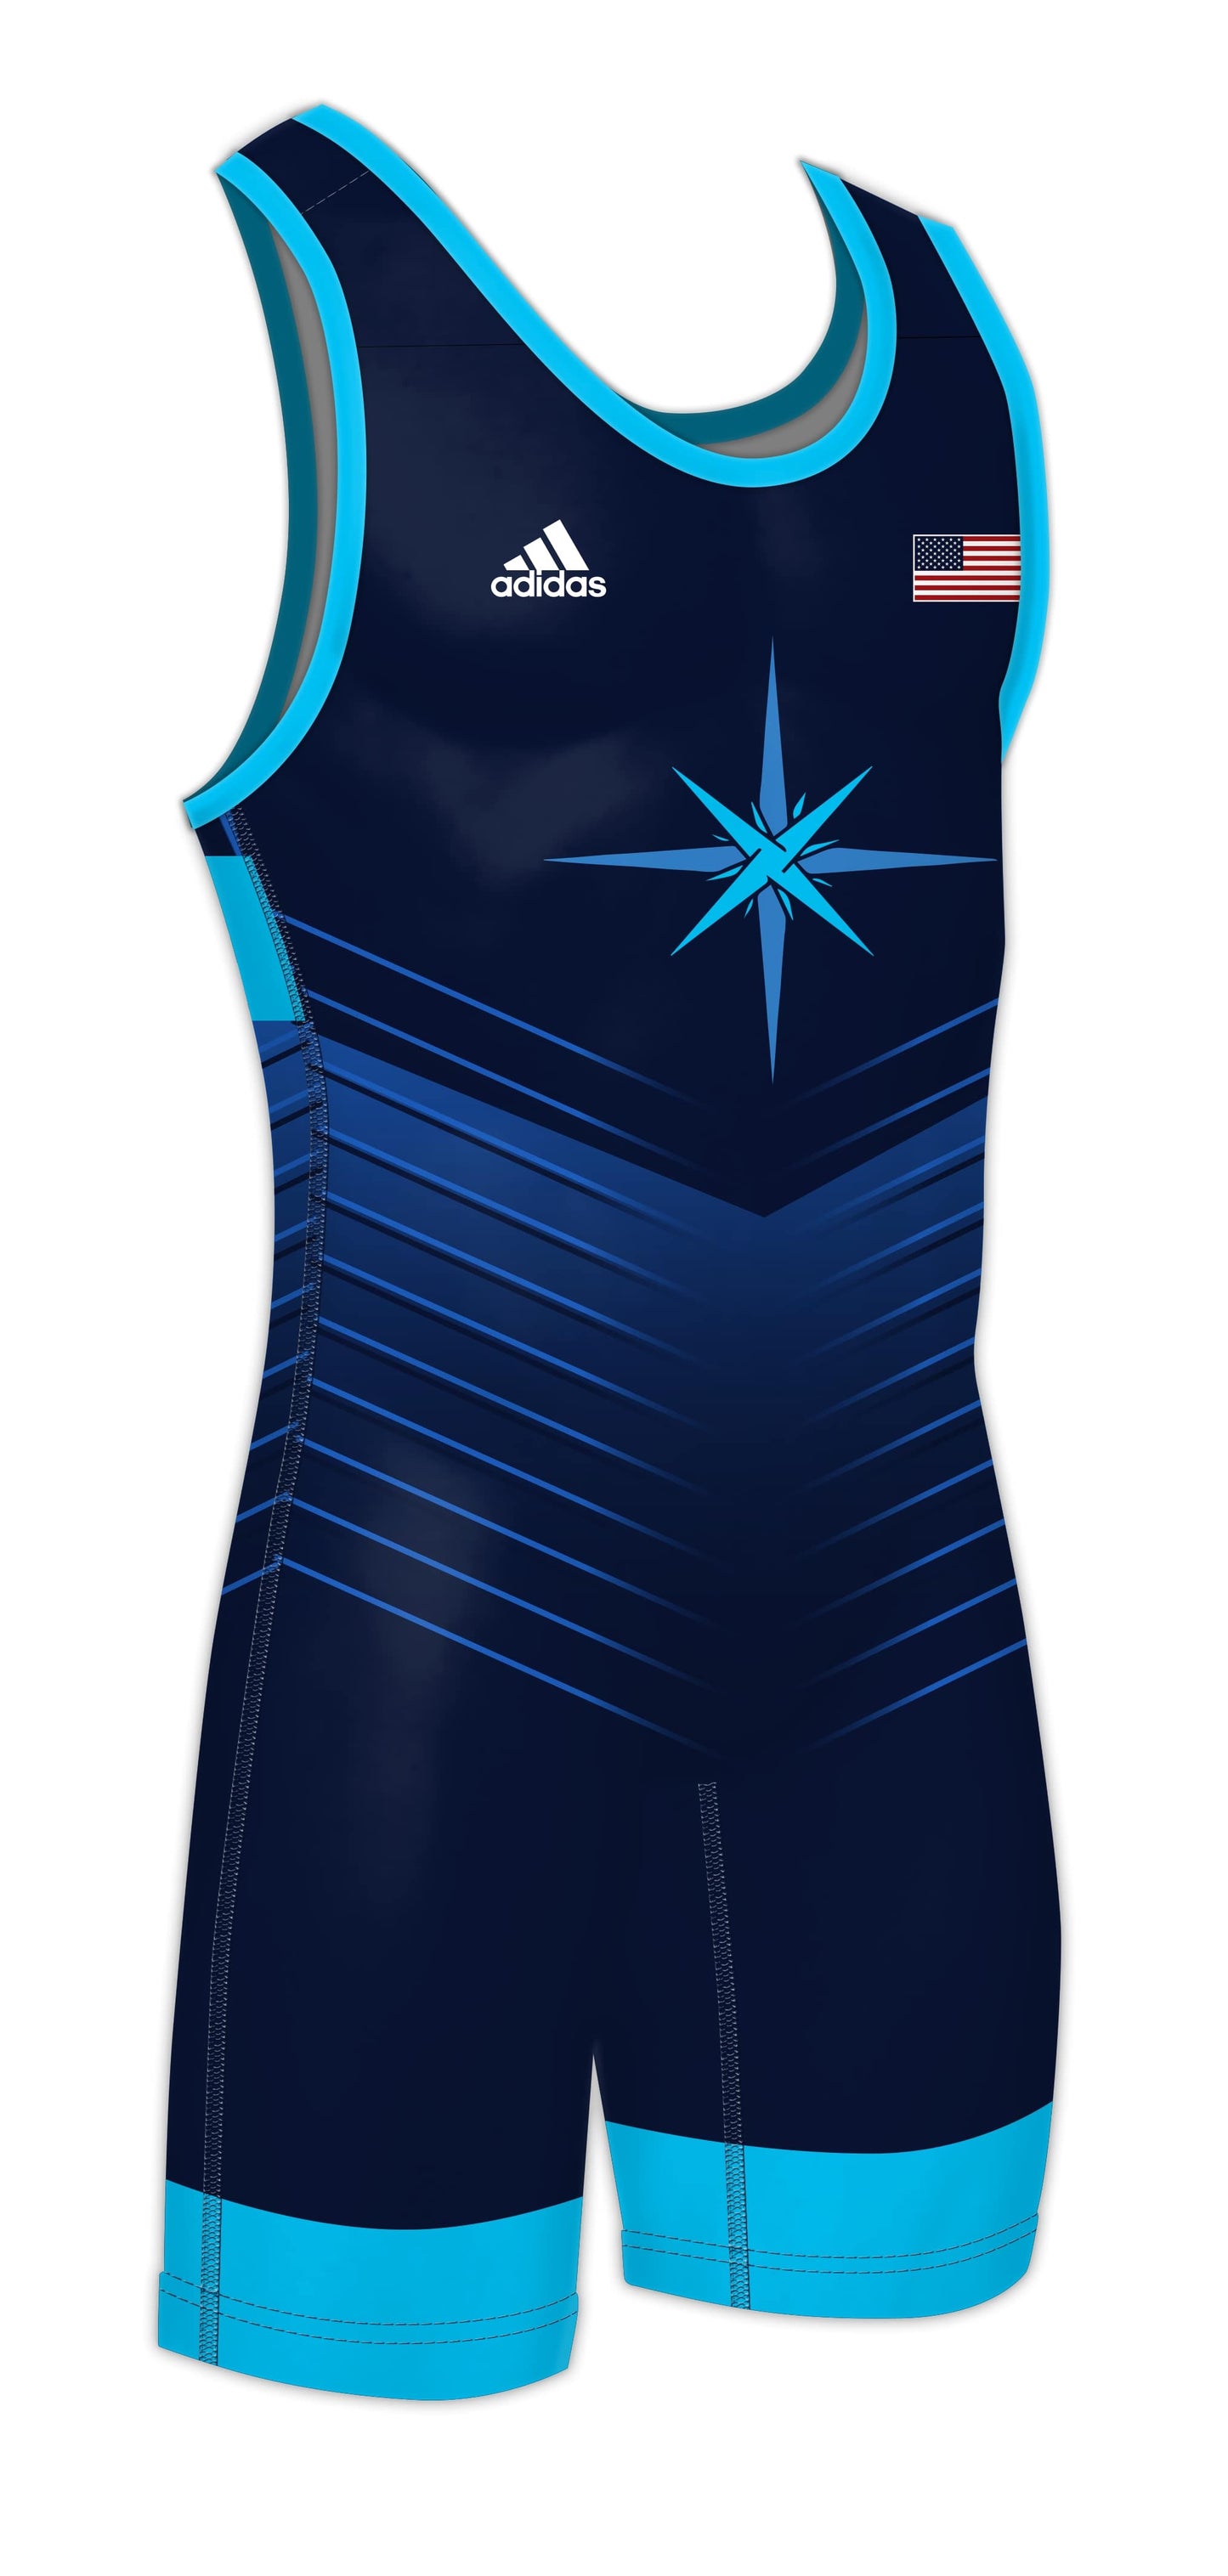 Adidas Sublimated Singlet (AS108c-11-57)